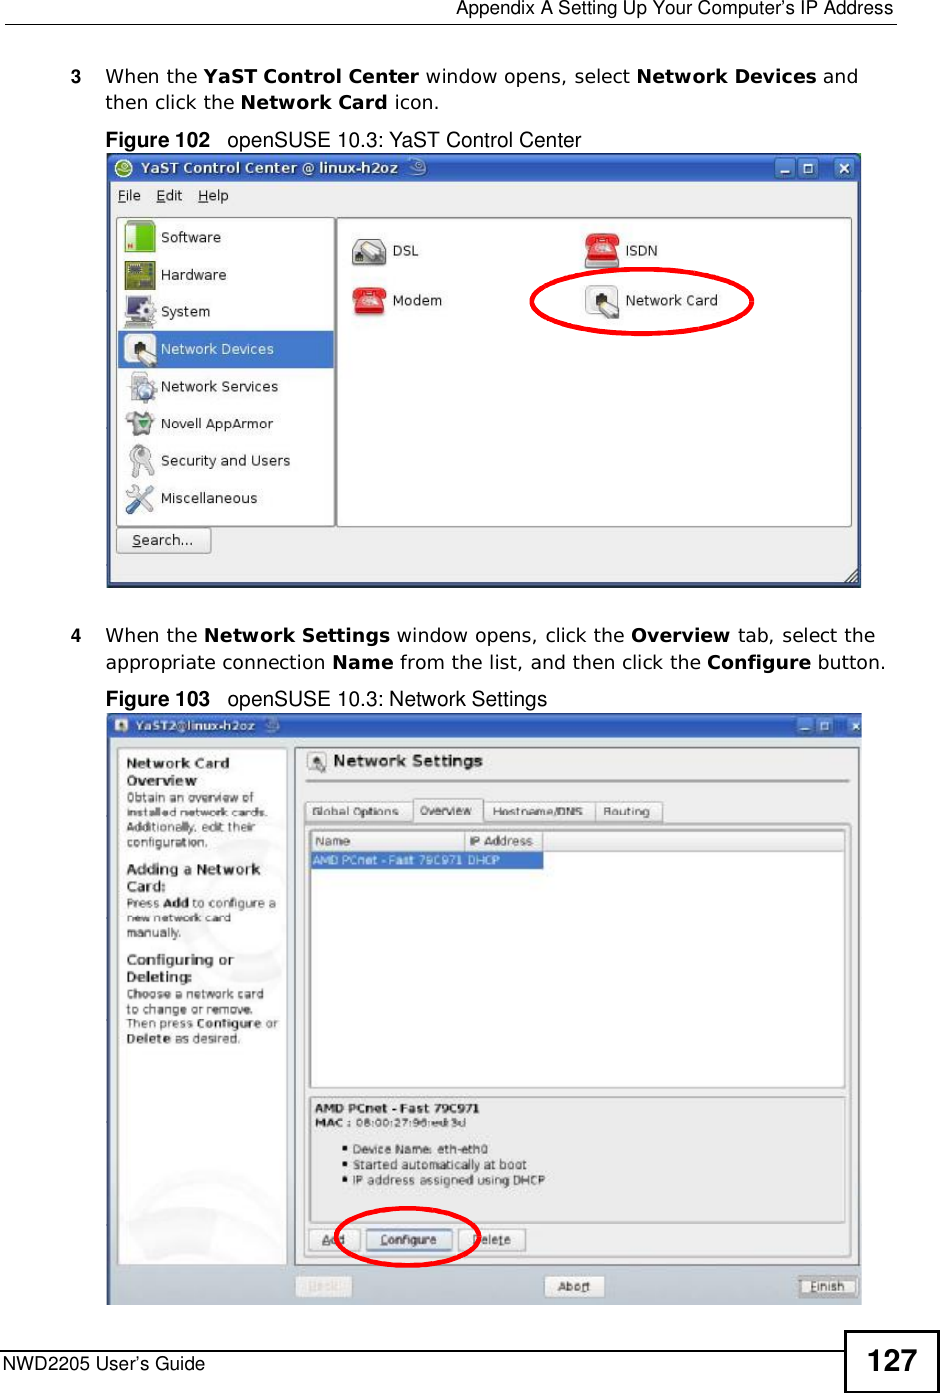  Appendix ASetting Up Your Computer’s IP AddressNWD2205 User’s Guide 1273When the YaST Control Center window opens, select Network Devices and then click the Network Card icon.Figure 102   openSUSE 10.3: YaST Control Center4When the Network Settings window opens, click the Overview tab, select the appropriate connection Name from the list, and then click the Configure button. Figure 103   openSUSE 10.3: Network Settings